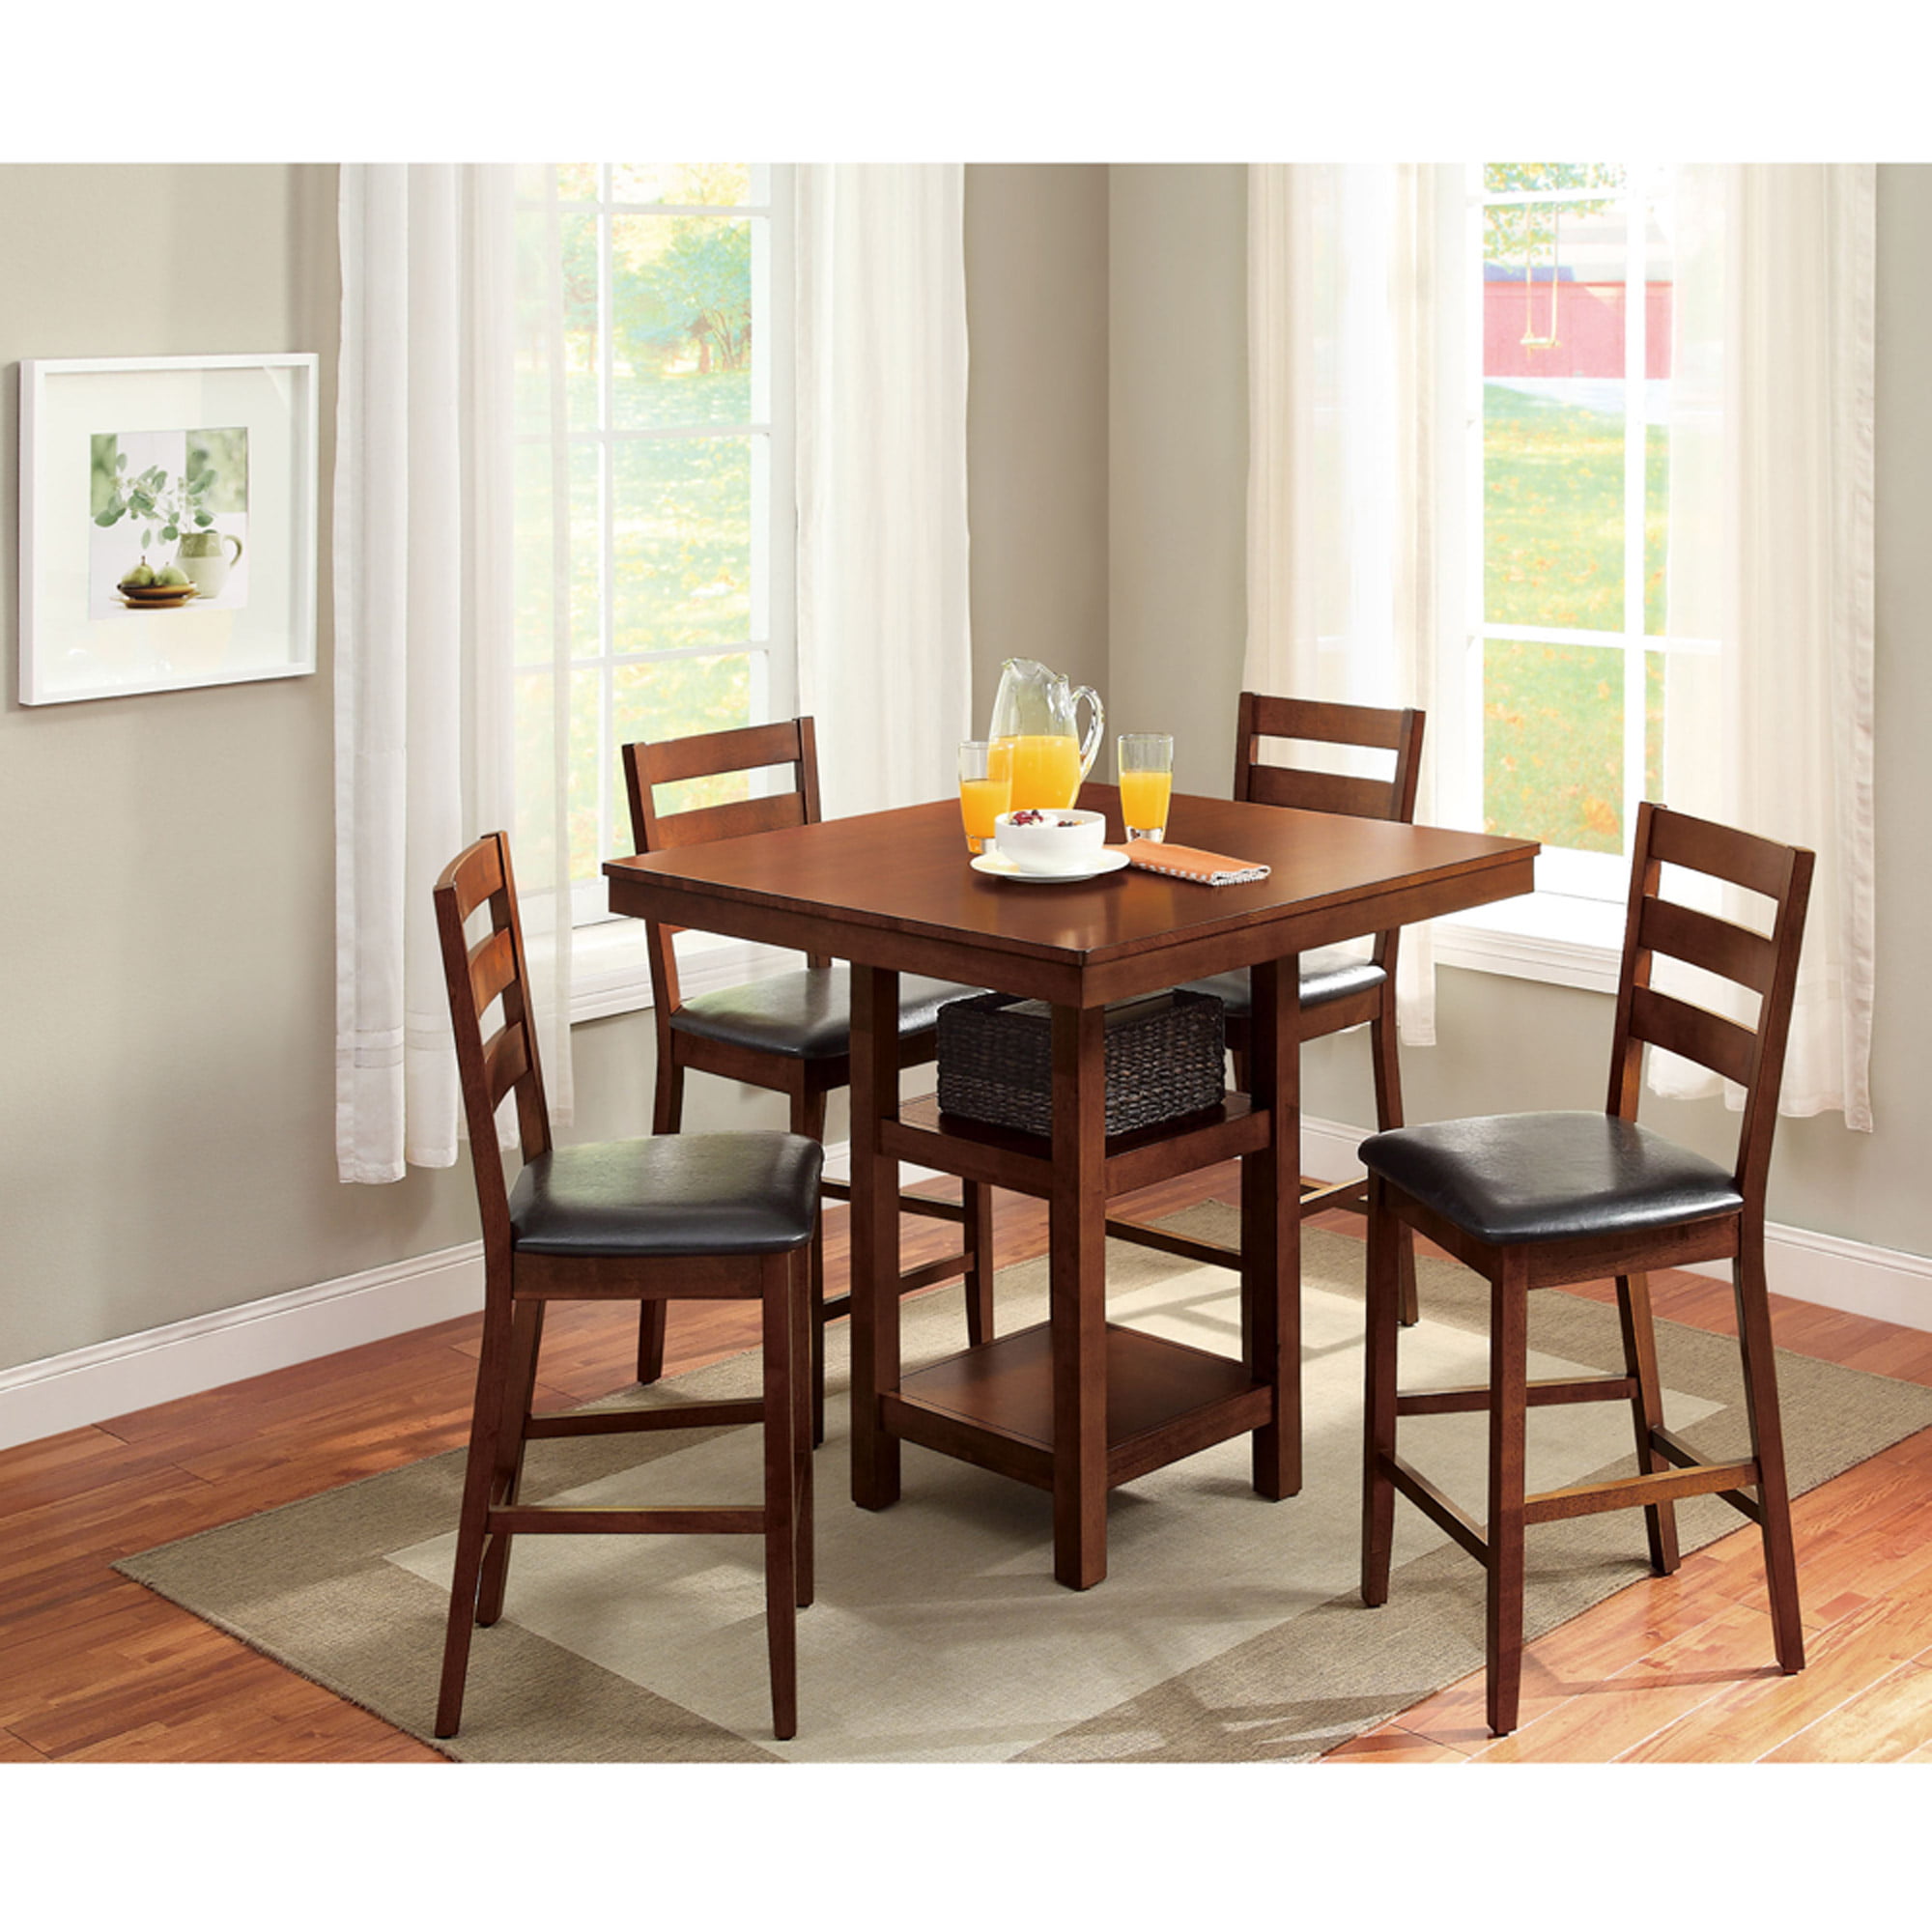 Featured image of post Kitchen Table And Chairs Walmart